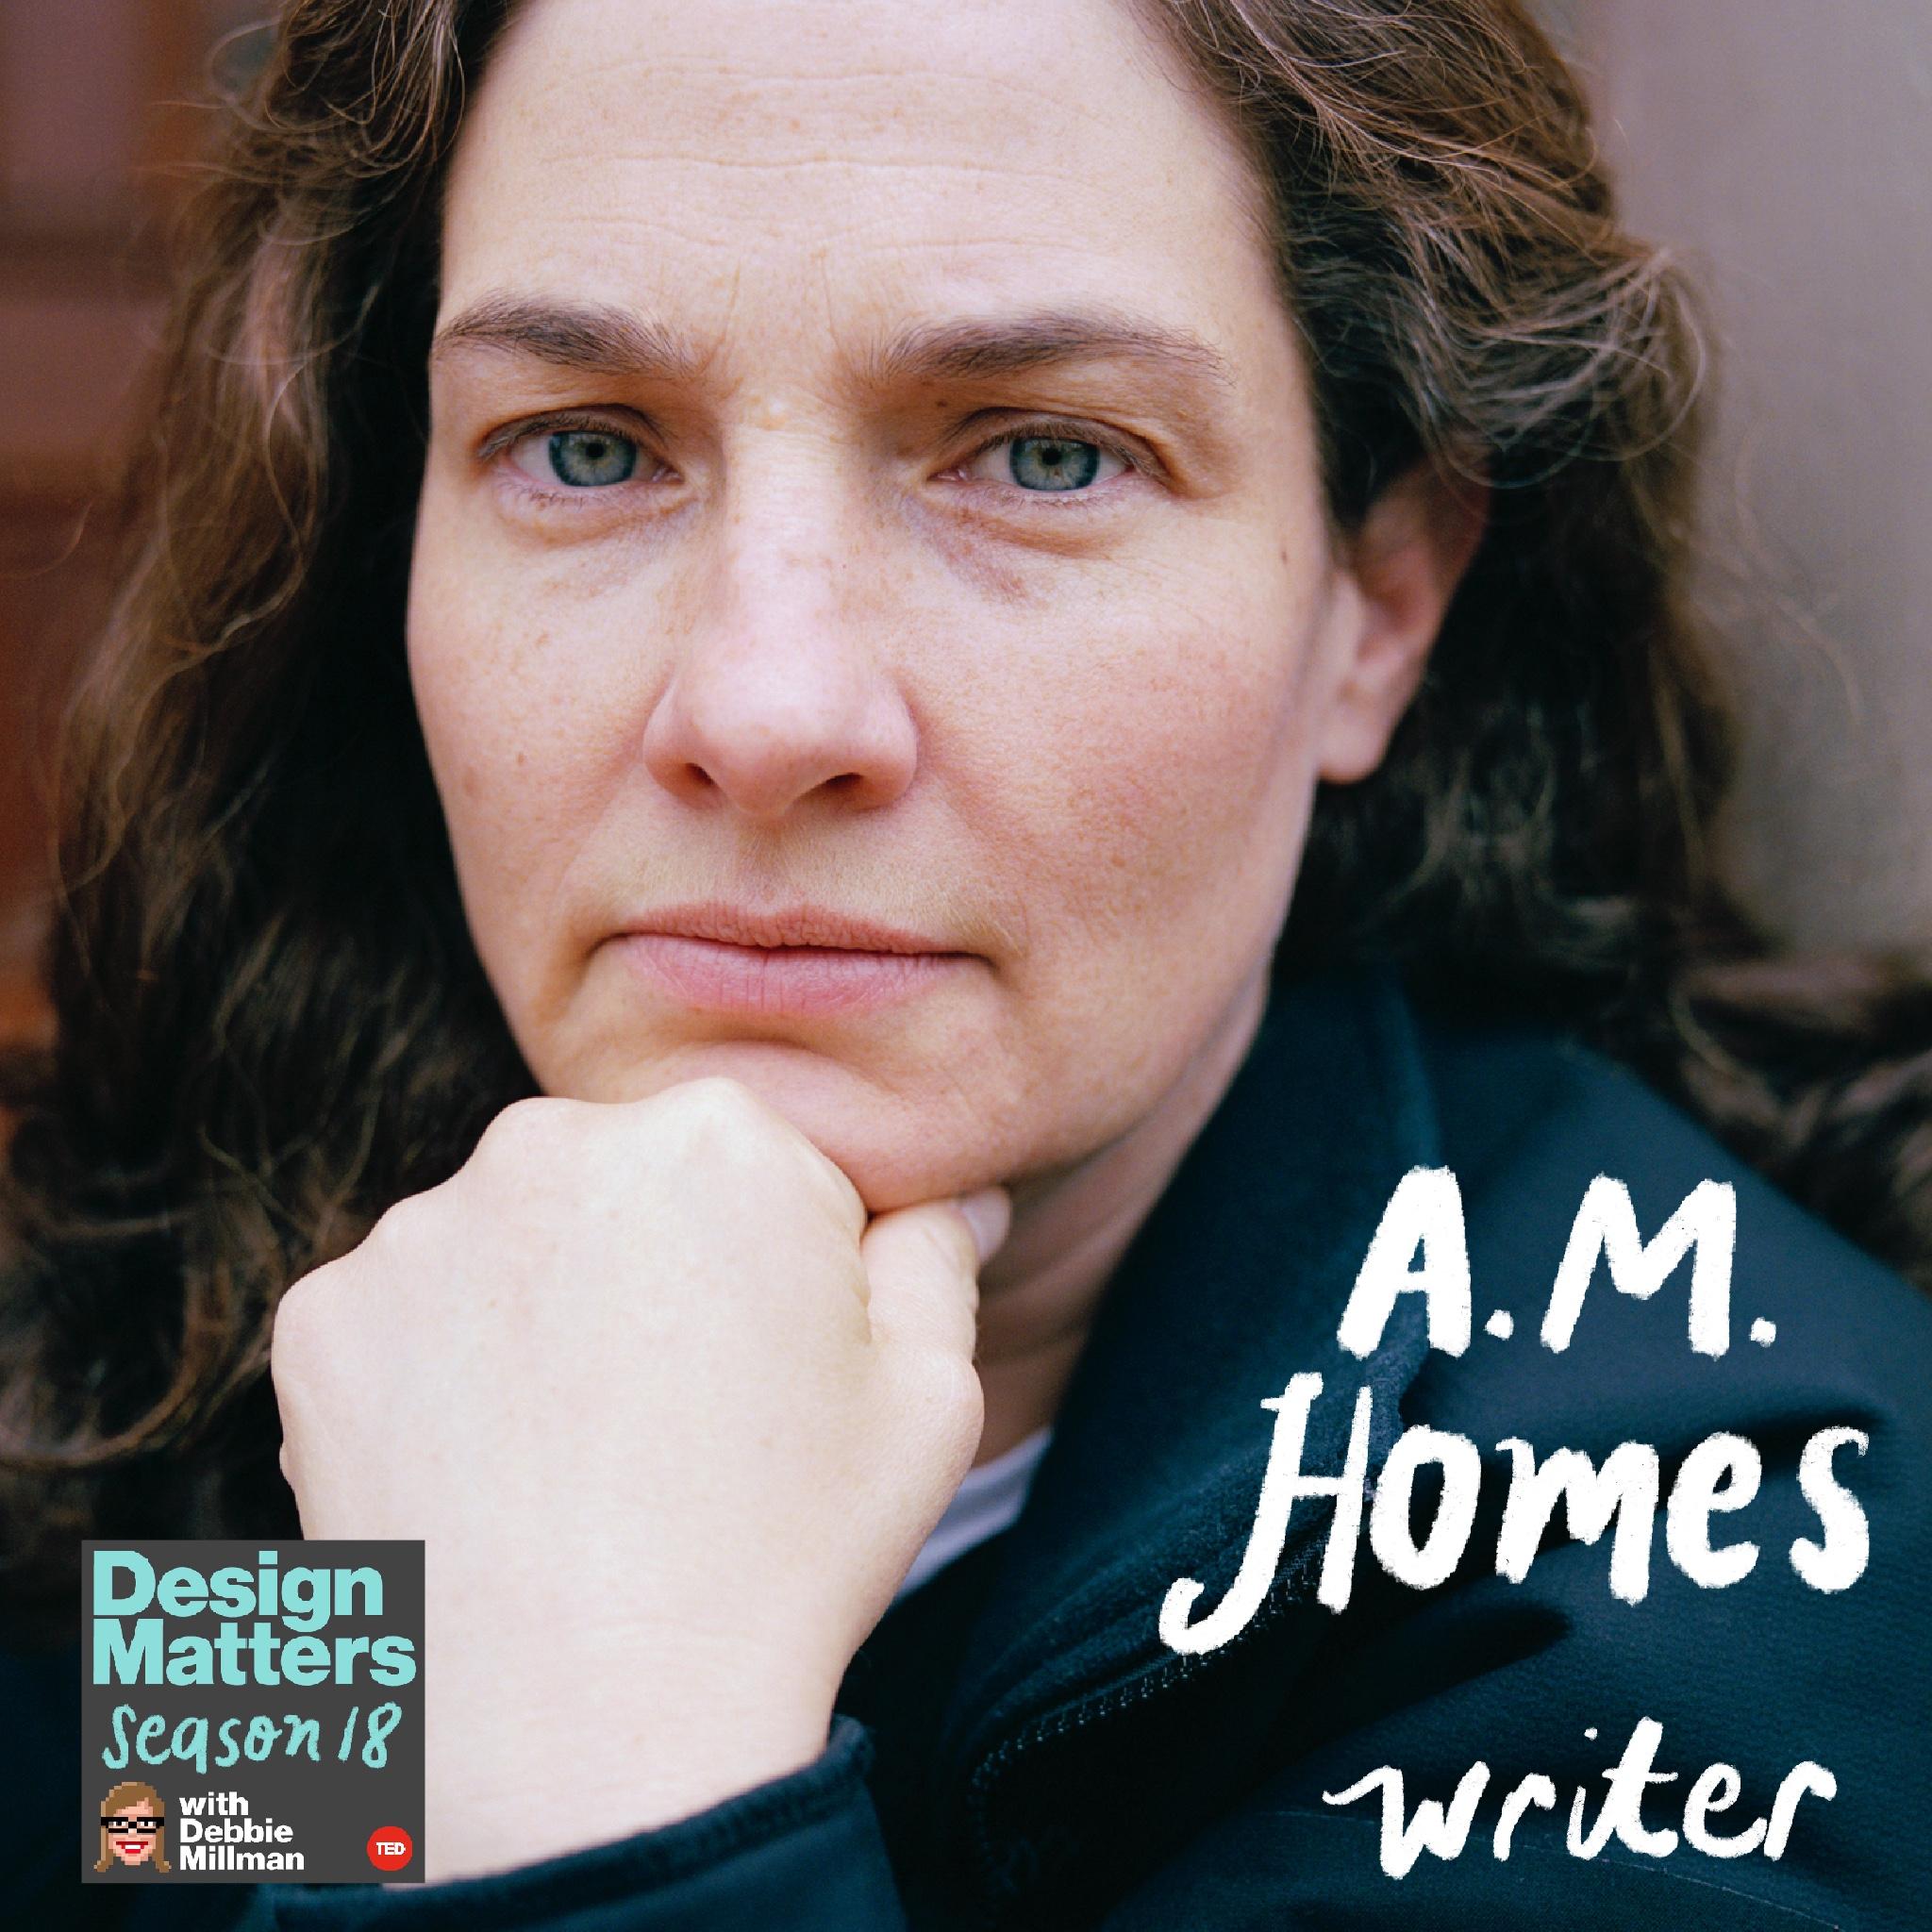 Thumbnail for "Best of Design Matters: A.M. Homes".